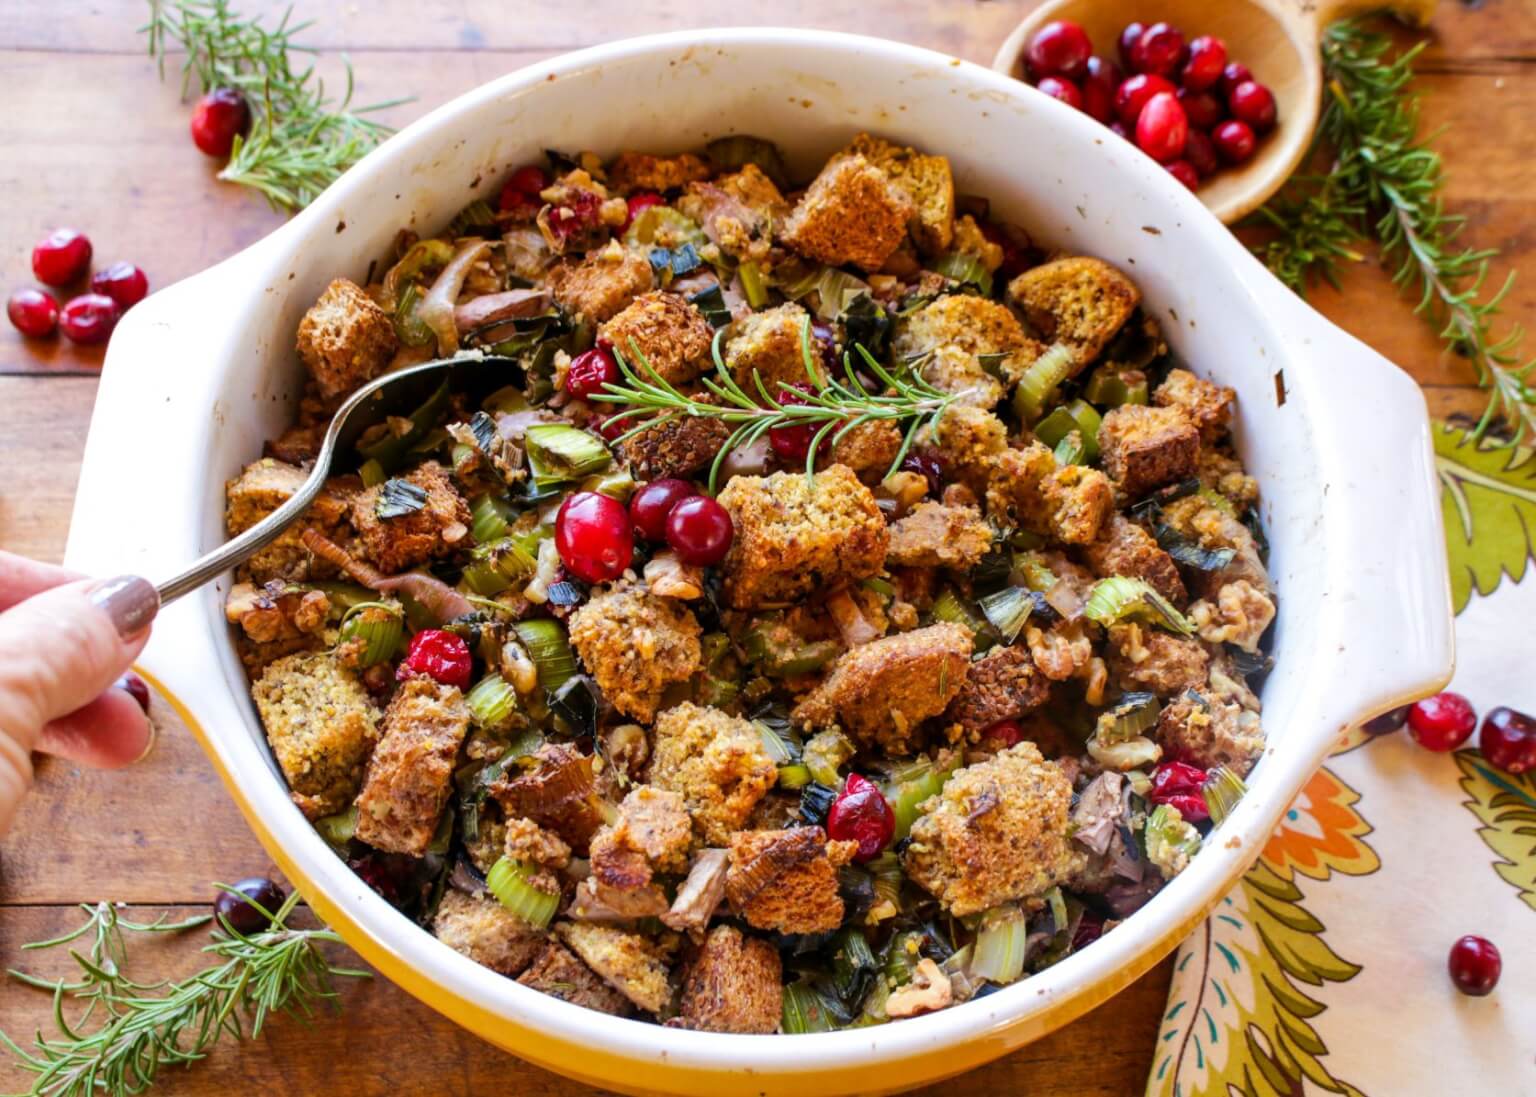 Cornbread Stuffing with Cranberries – Sharon Palmer, The Plant Powered Dietitian